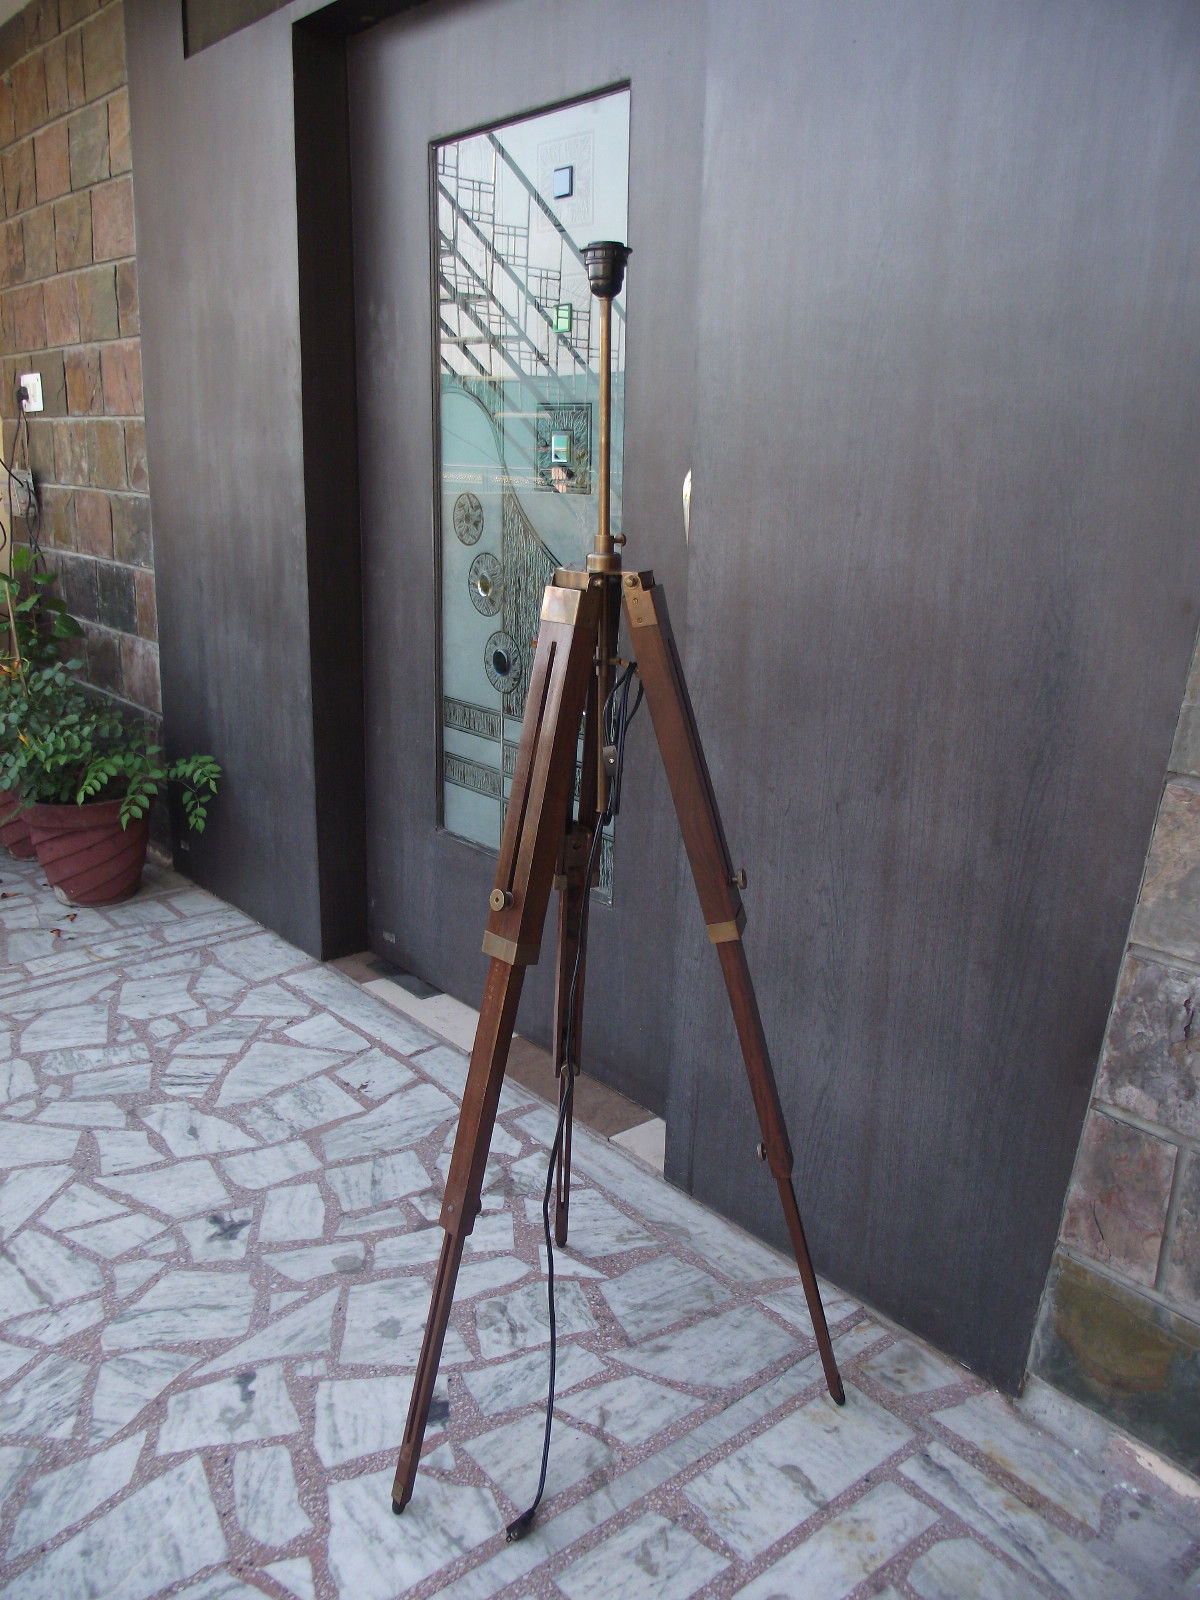 TRIPOD FLOOR LAMP STAND ANTIQUE WOOD ANTIQUE LAMP HOME AND DECOR FLOOR LAMP